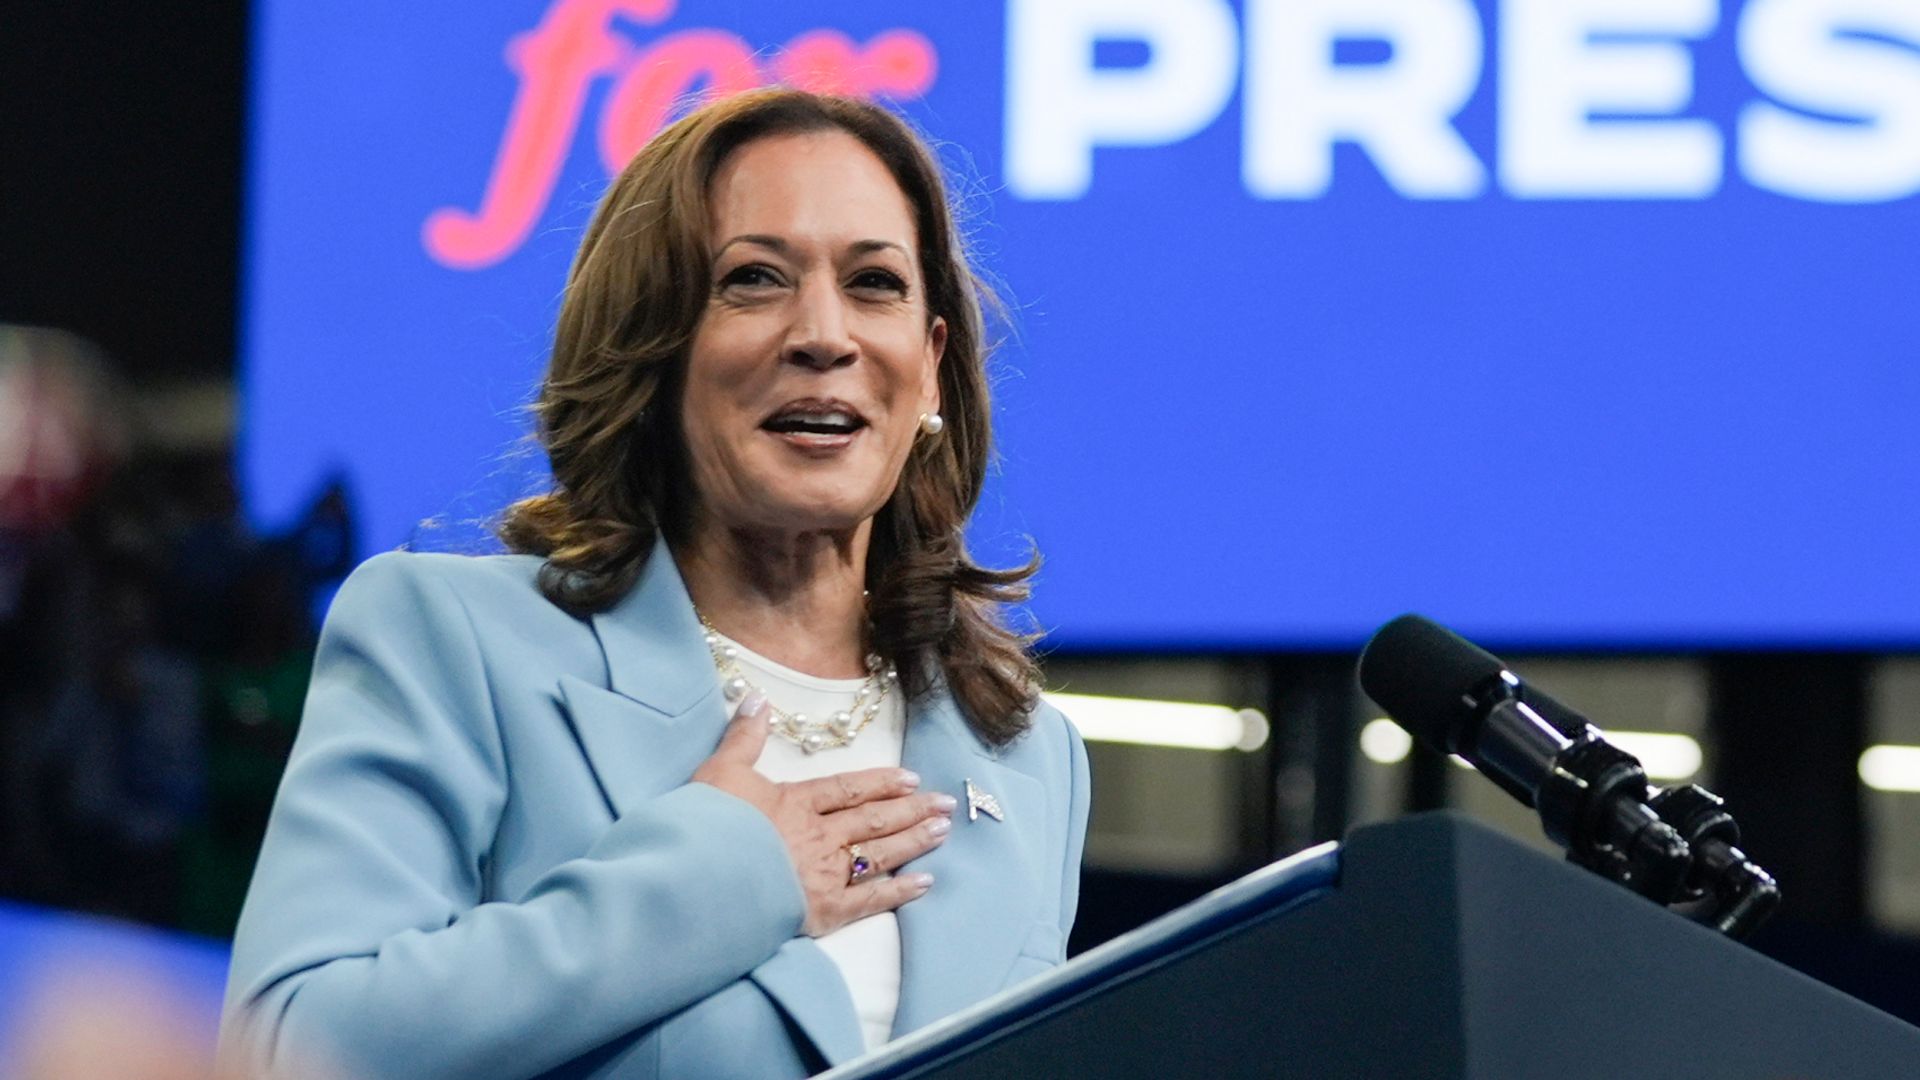 Harris now has no Democrat opponents for presidential nomination - after key deadline passes